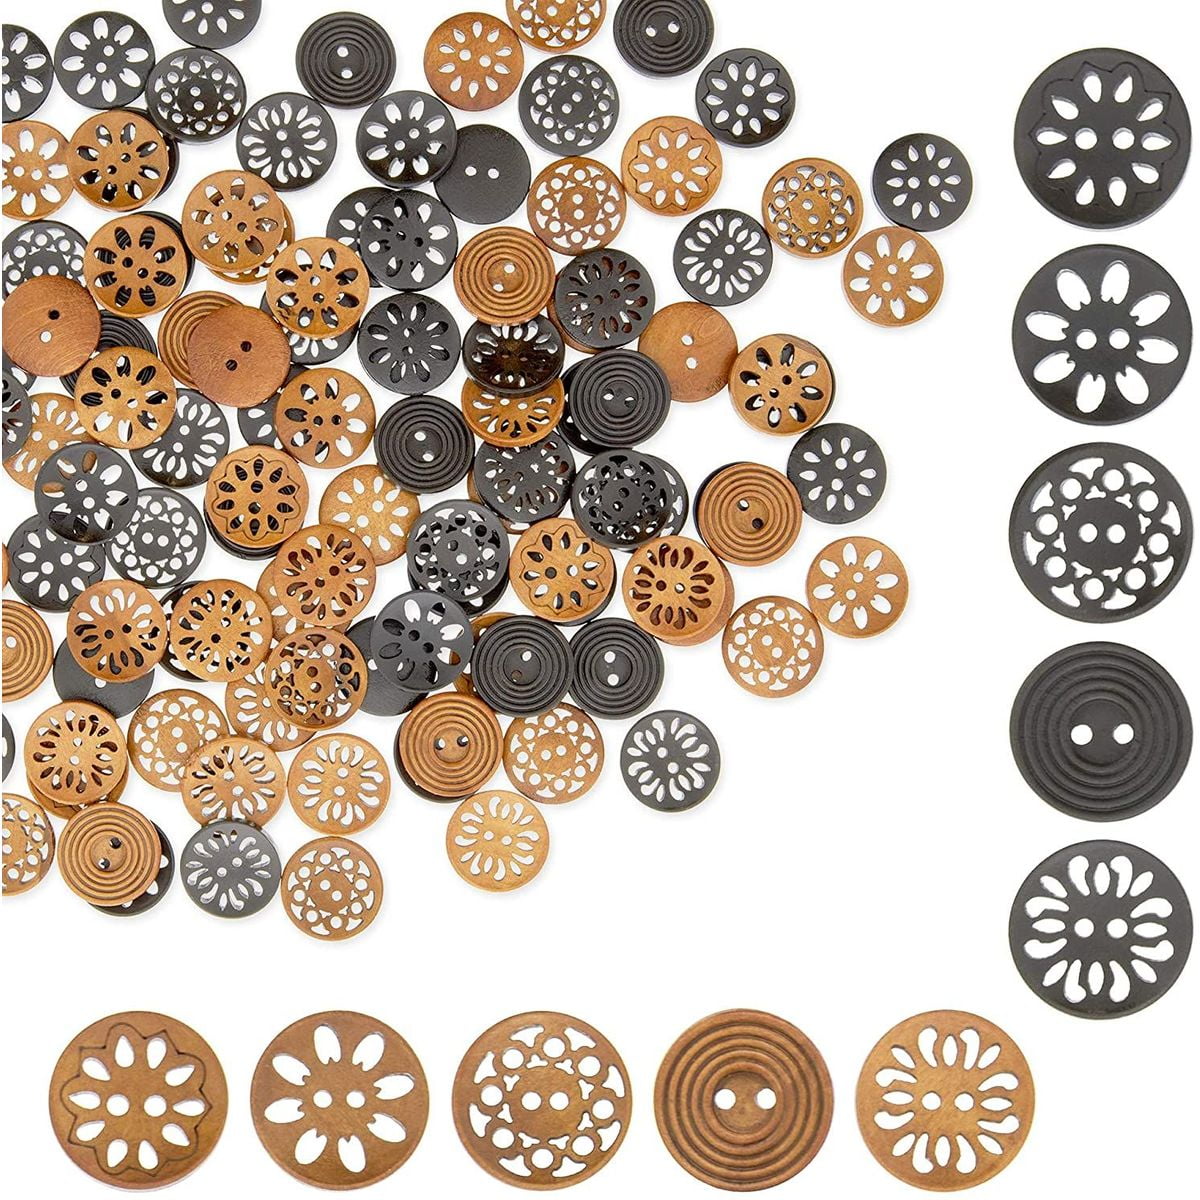 100Pcs Brown Coconut Shell 2 Holes Sewing Buttons Scrapbooking 15mm Knopf Button